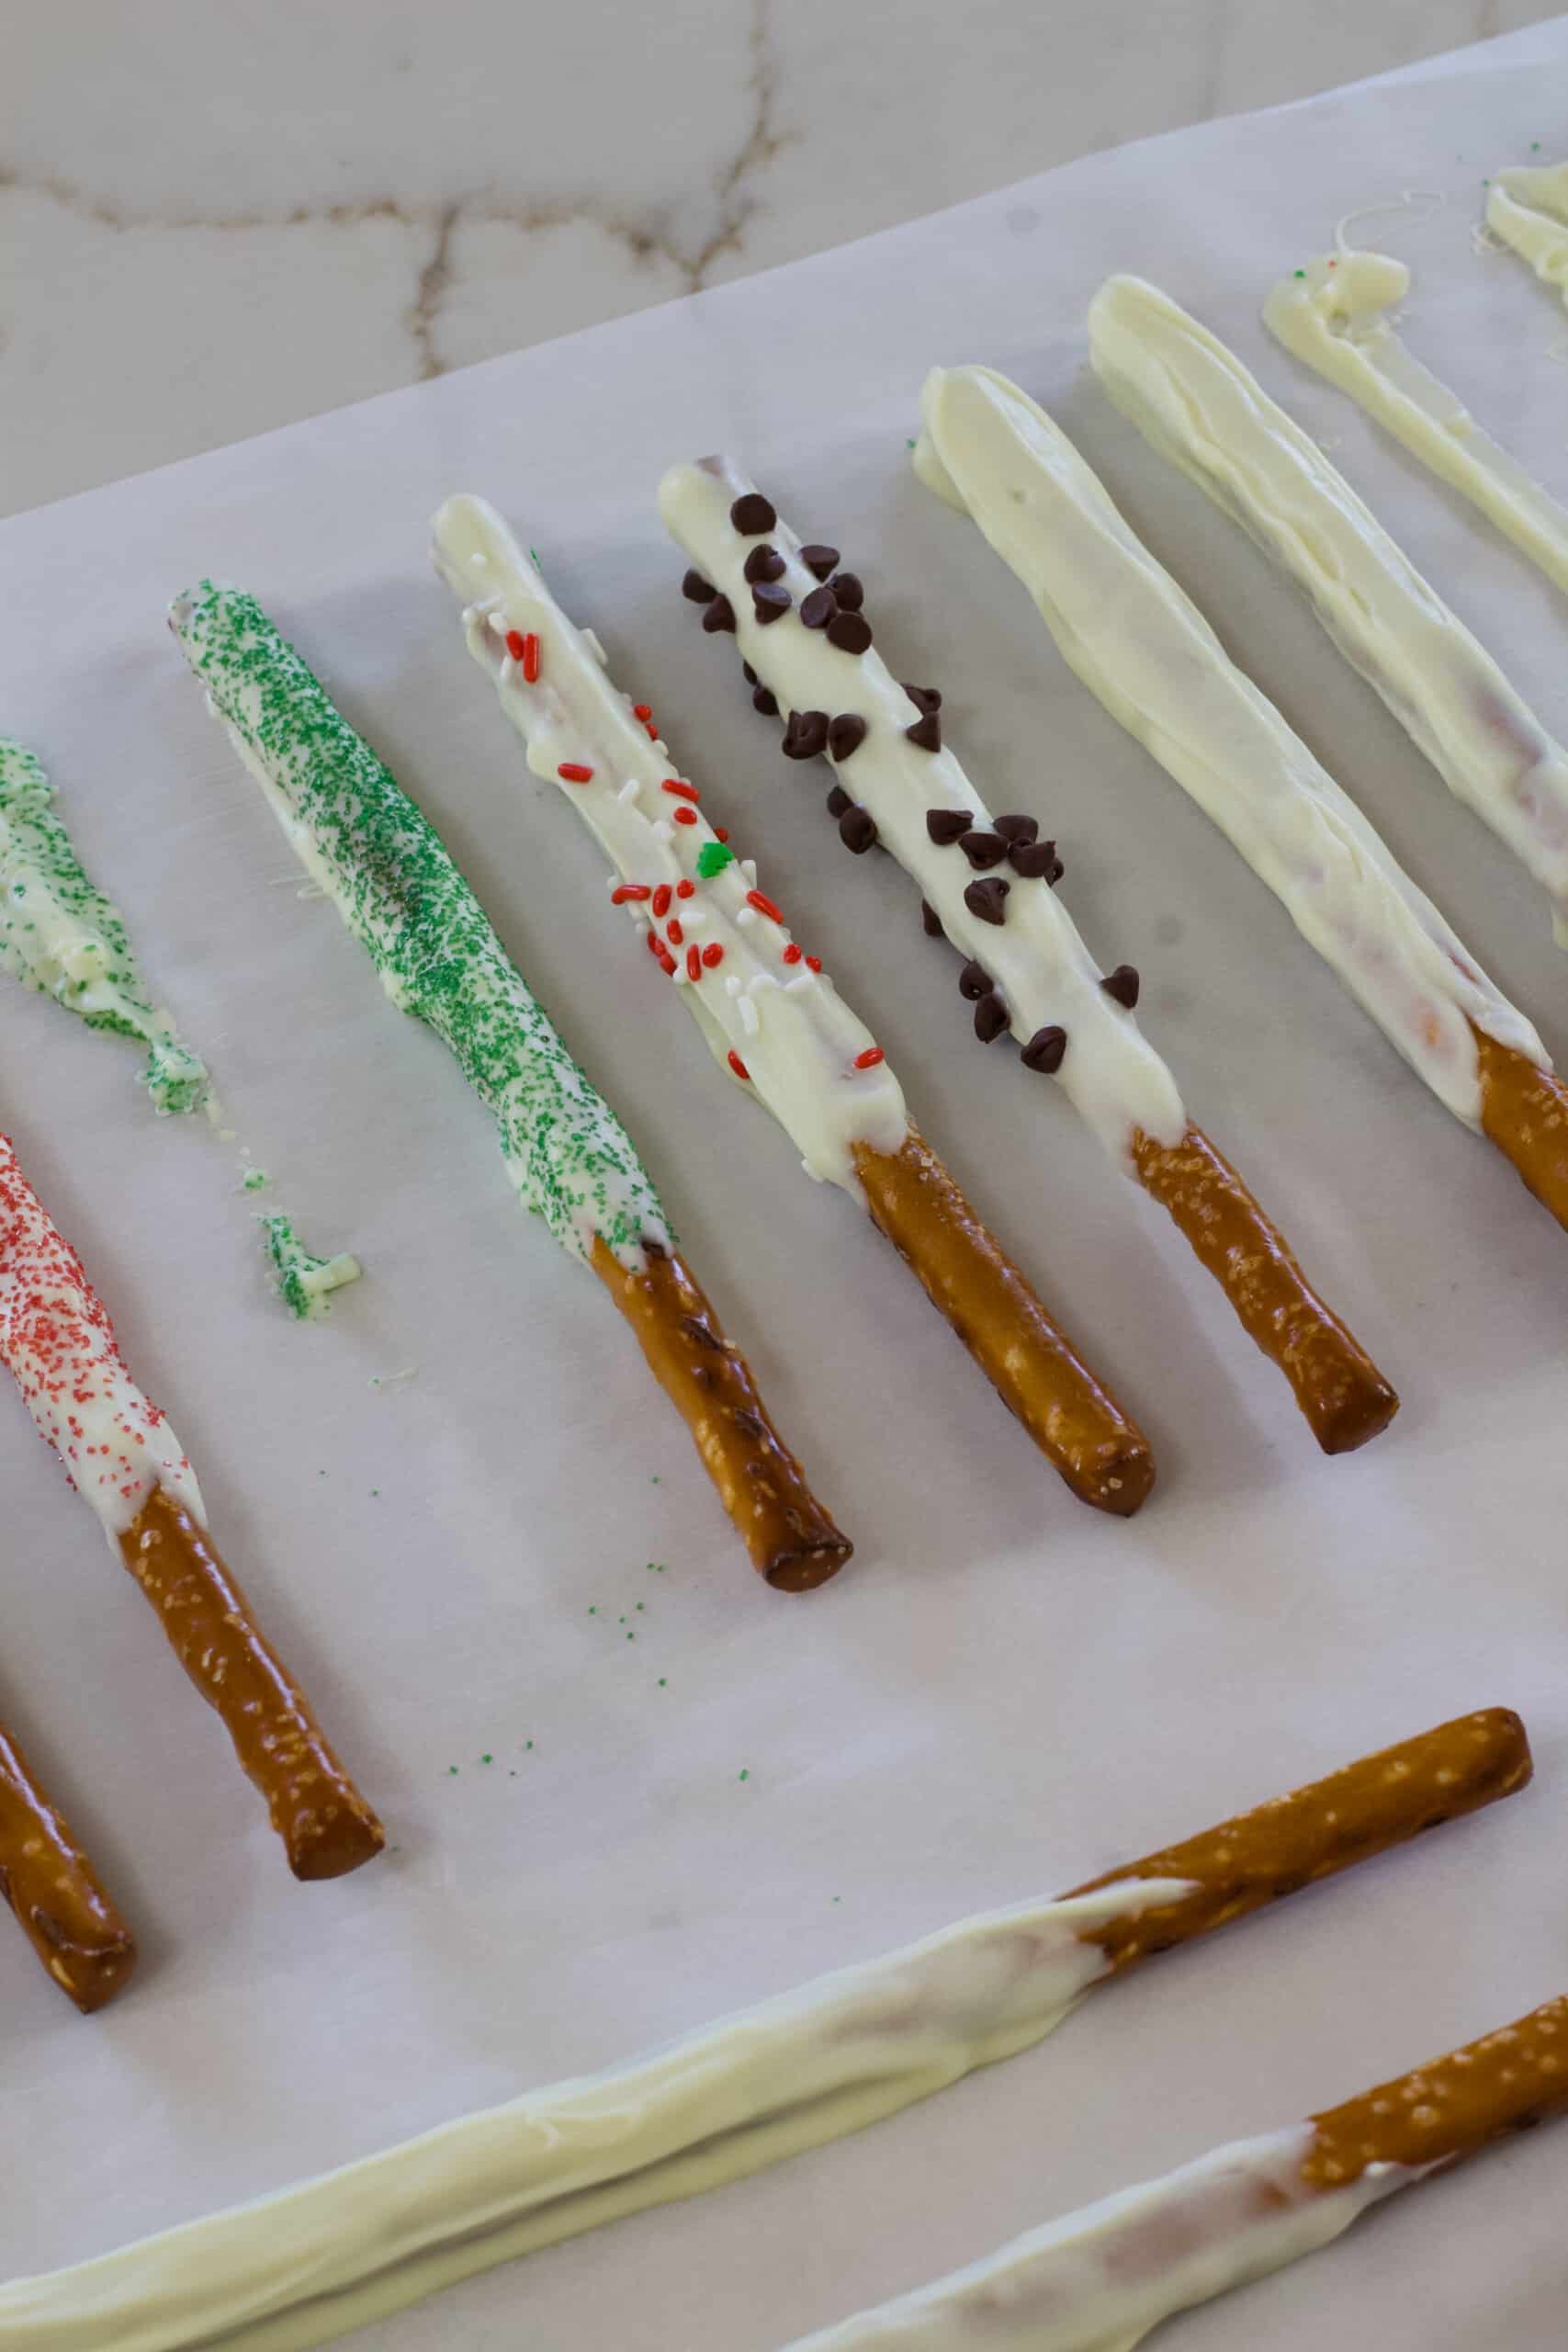 Many pretzel rods that have been dipped in white chocolate that are drying.